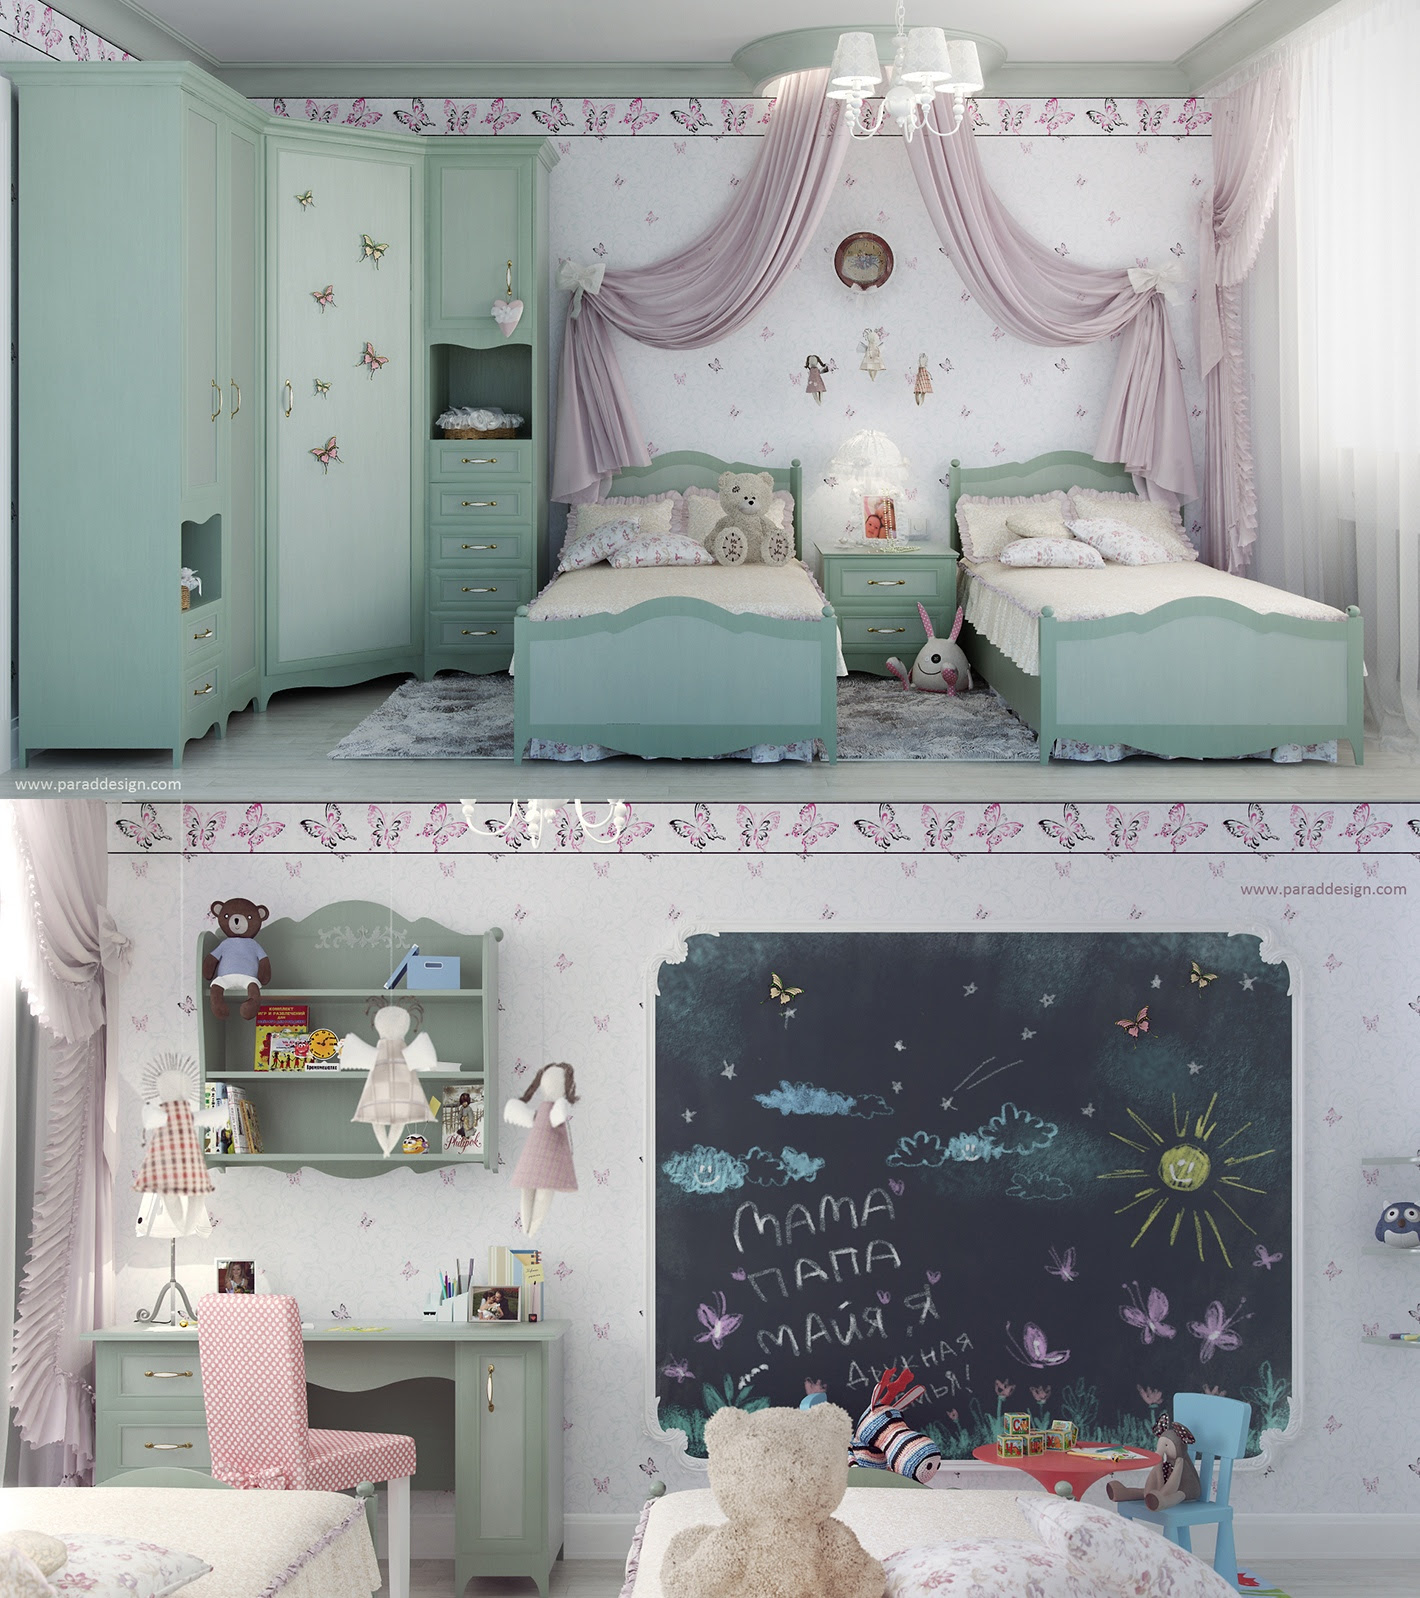 This is a formal bedroom for two young girls with twin beds and a ...